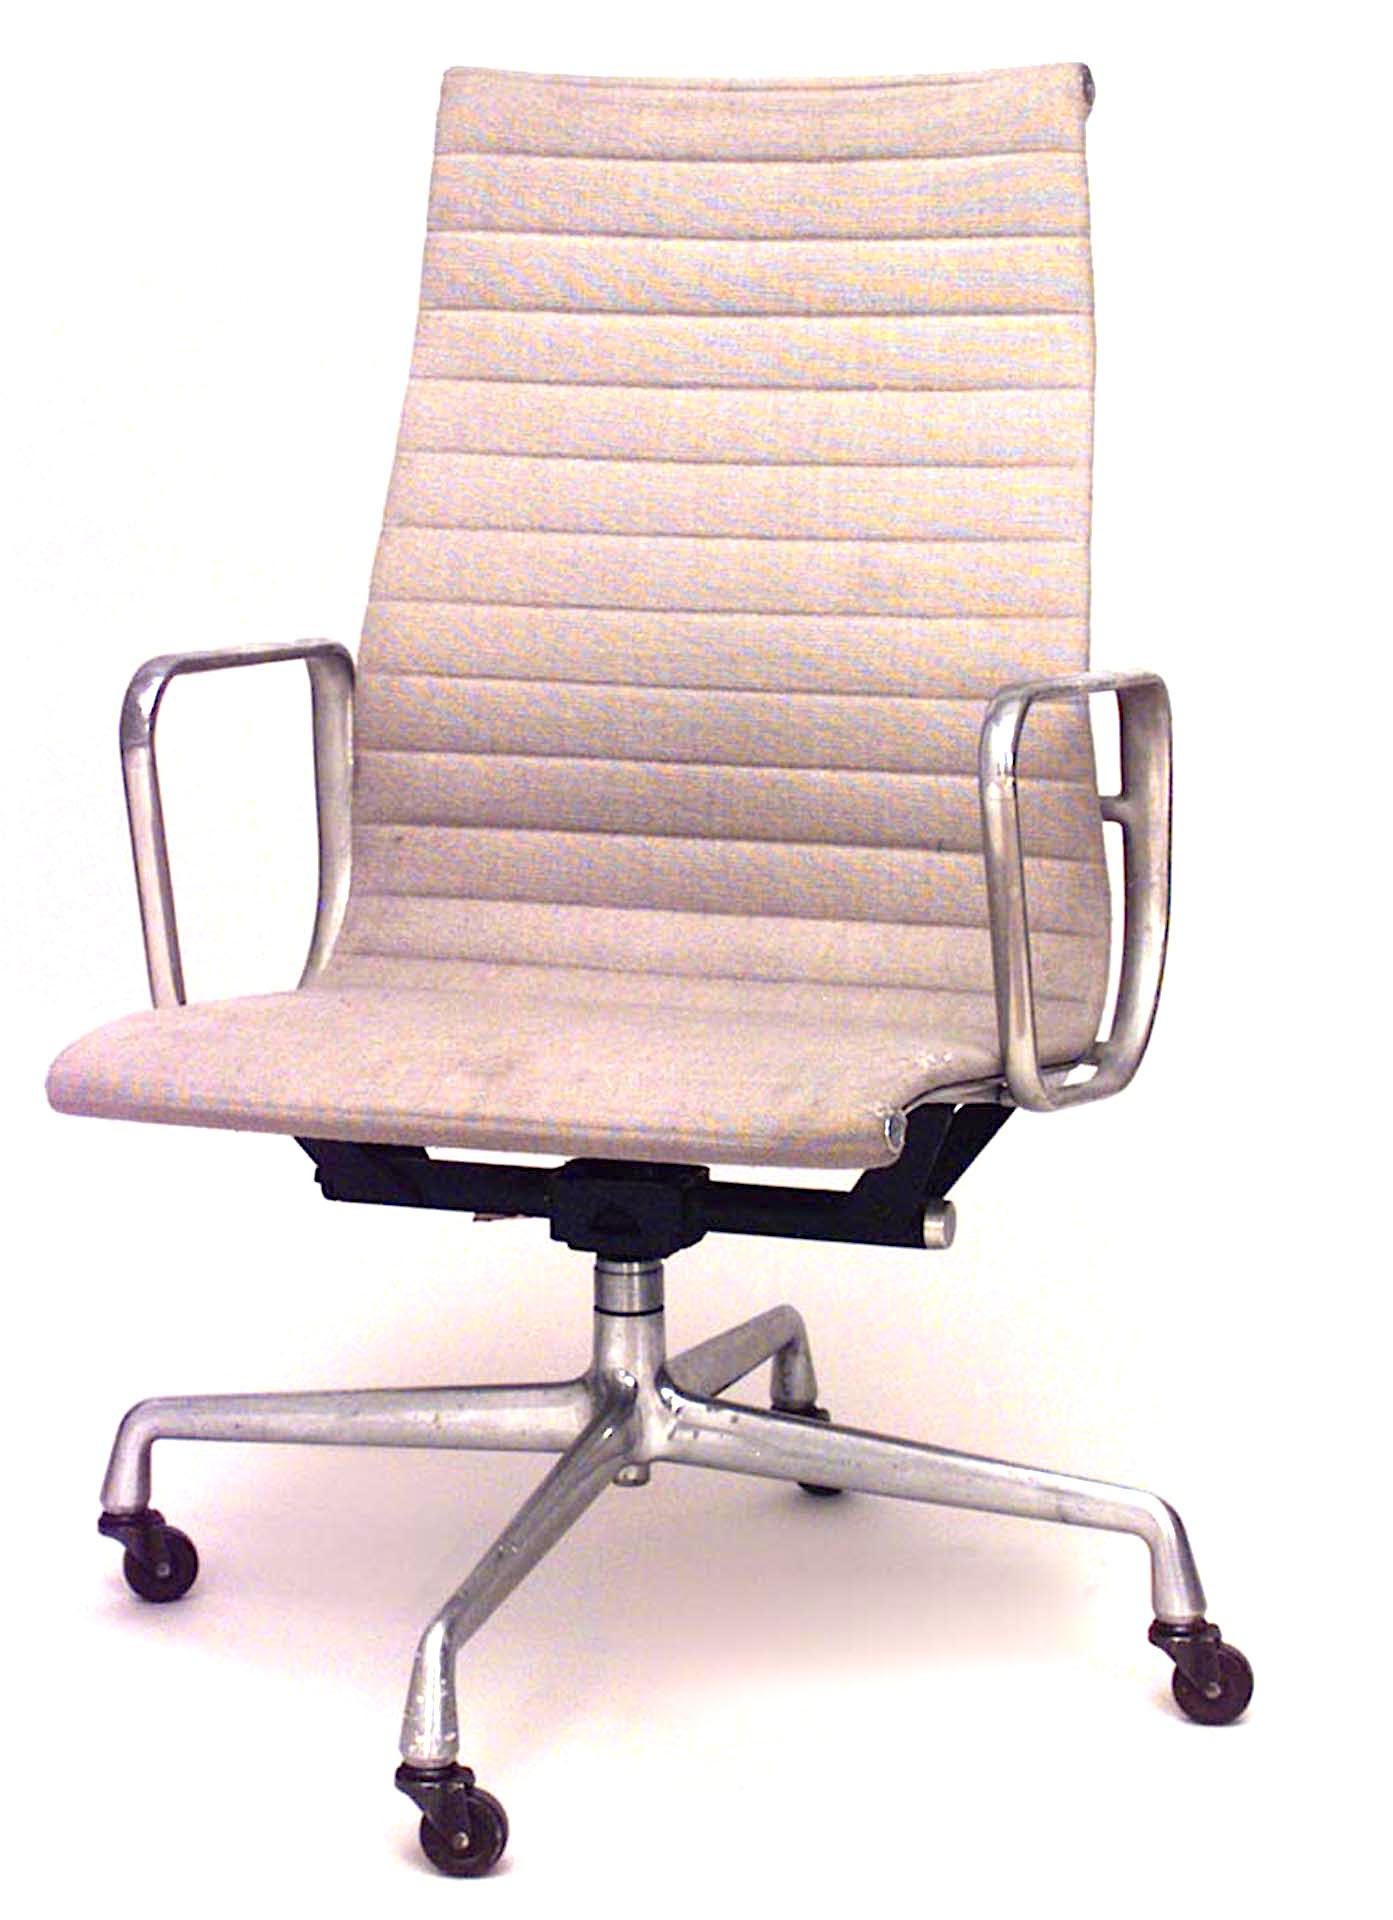 Designed by Charles Eames and manufactured by Herman Miller, this set of 10 (ten) 1950's American conference chairs features a grey high back design and aluminum swivel bases.